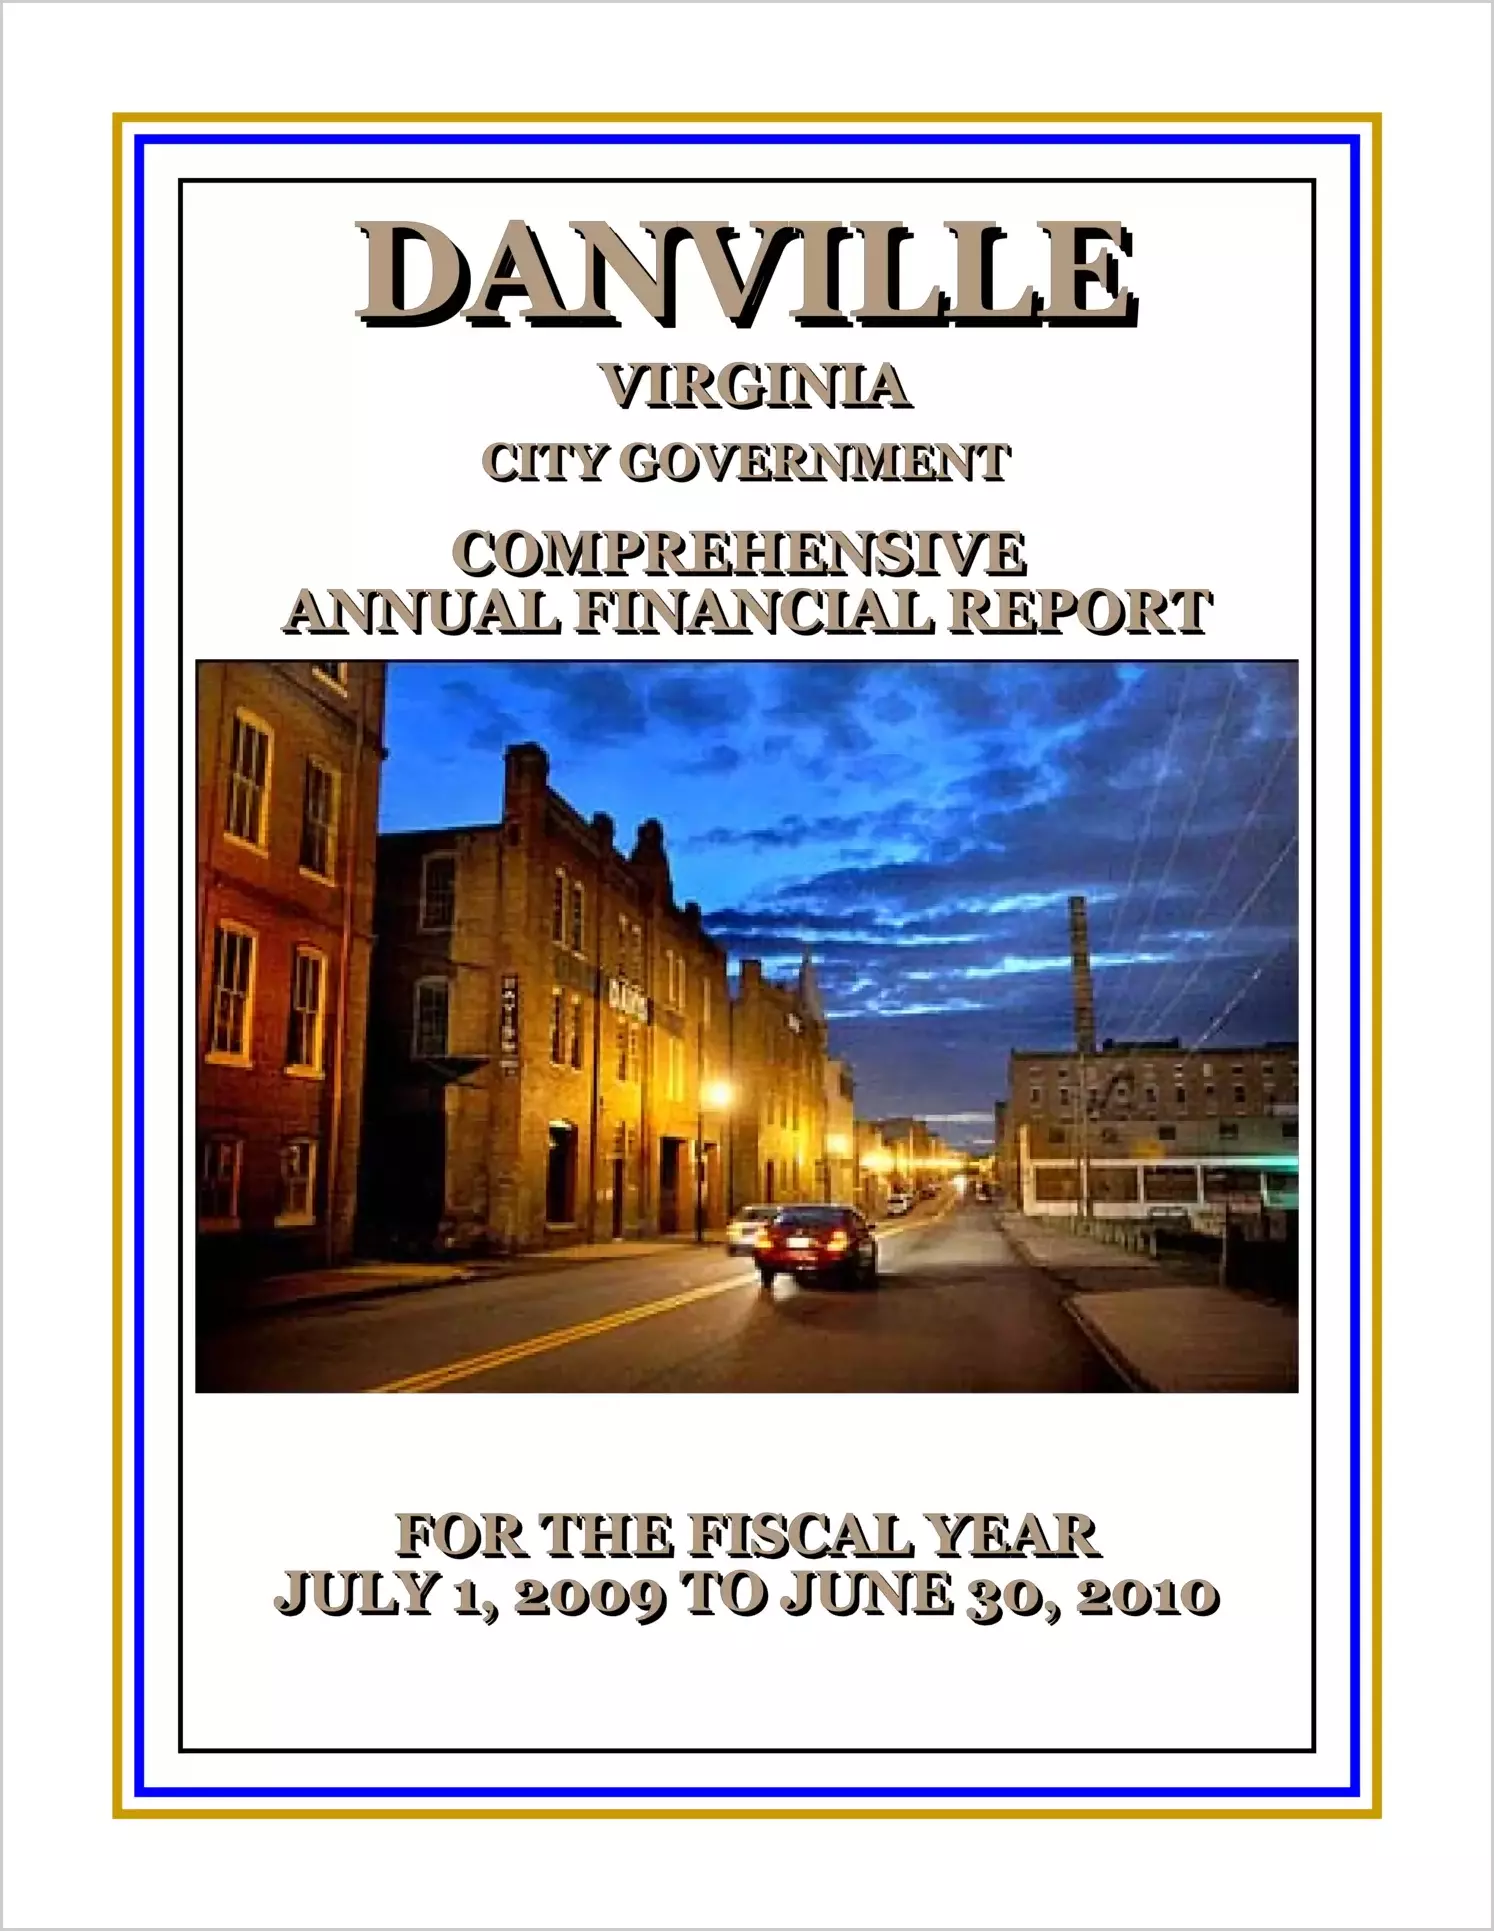 2010 Annual Financial Report for City of Danville